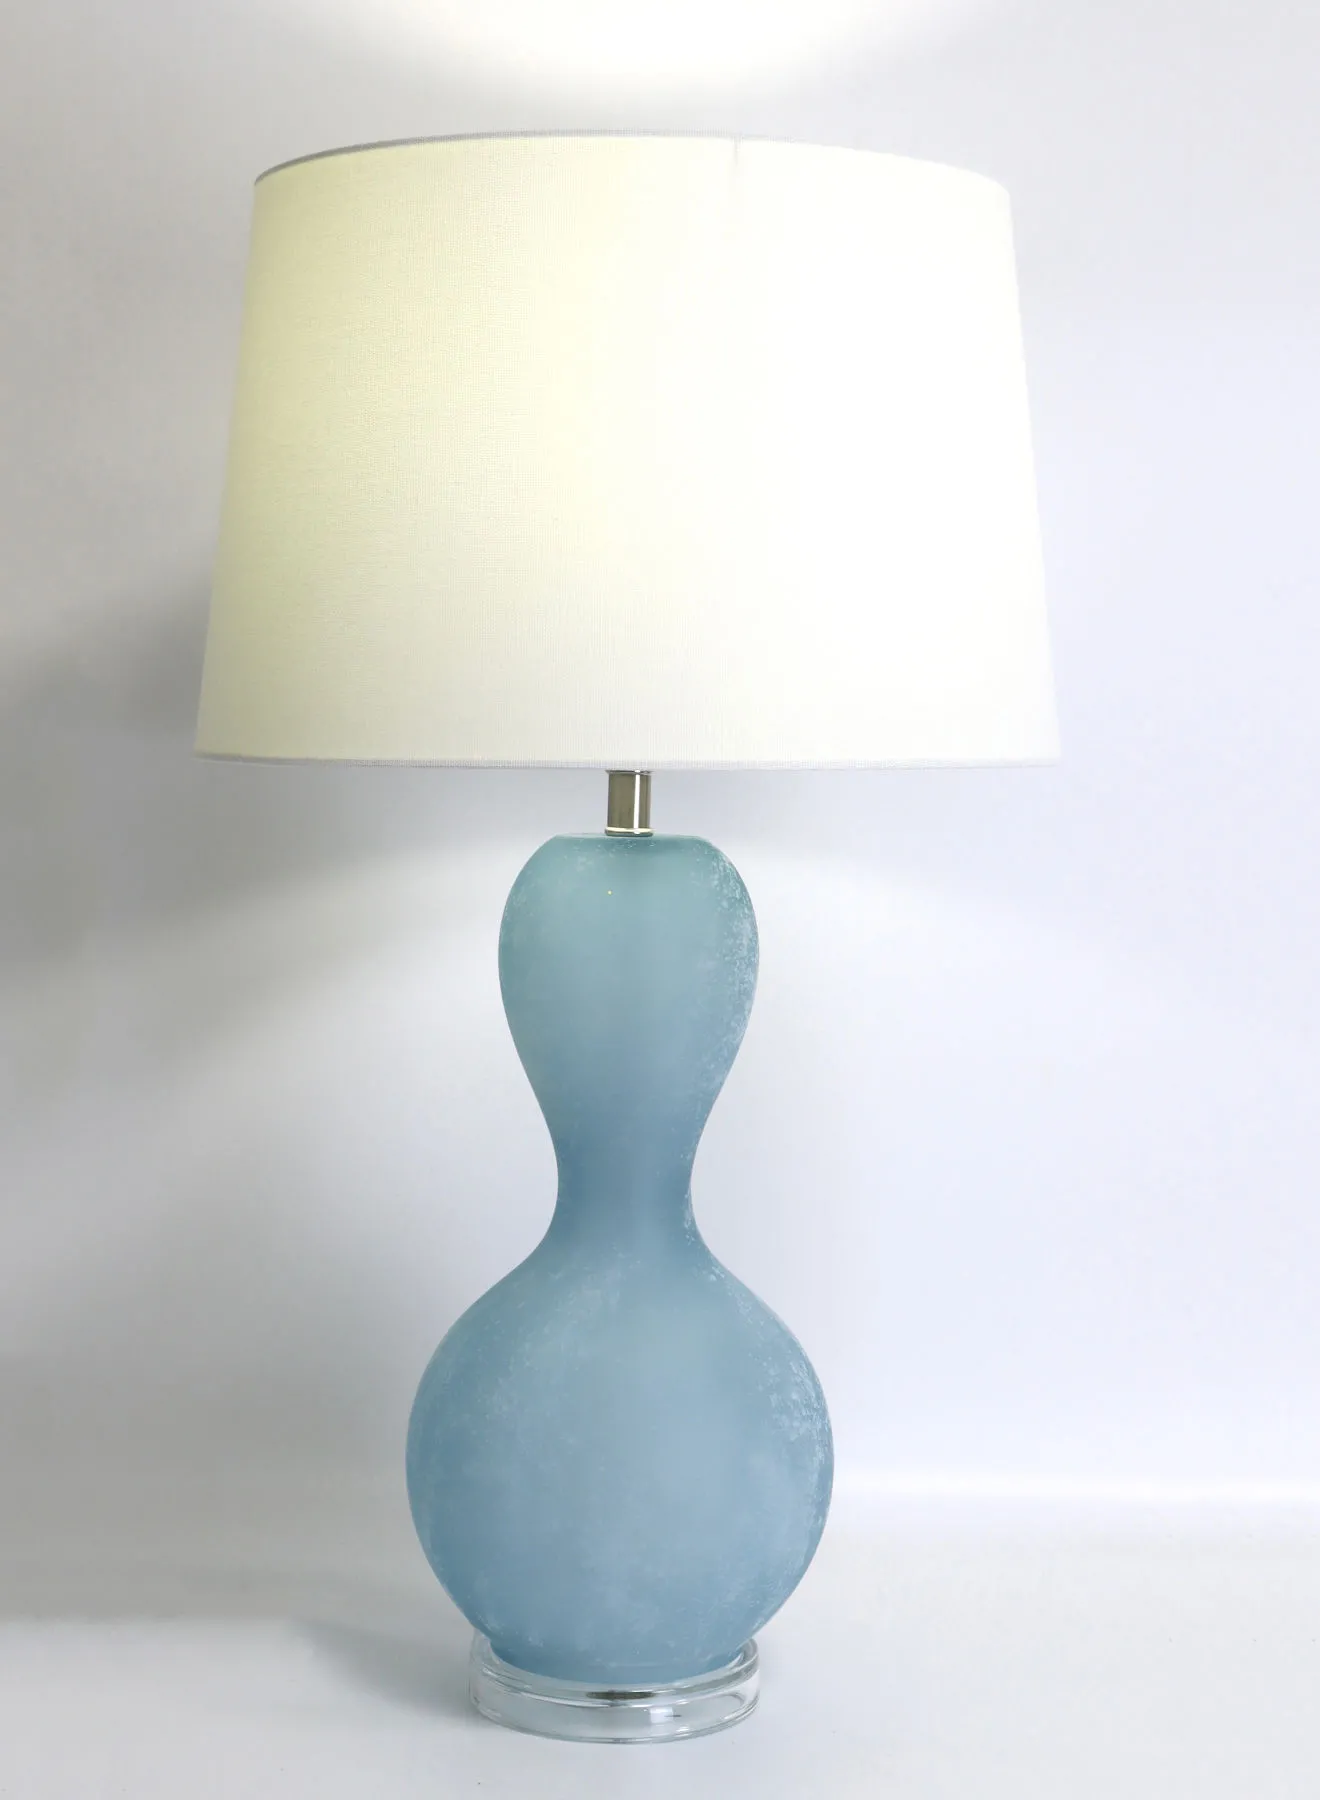 Switch Modern Design Glass Table Lamp Unique Luxury Quality Material for the Perfect Stylish Home RSN71025 Blue 15 x 26 Blue 15 x 26inch